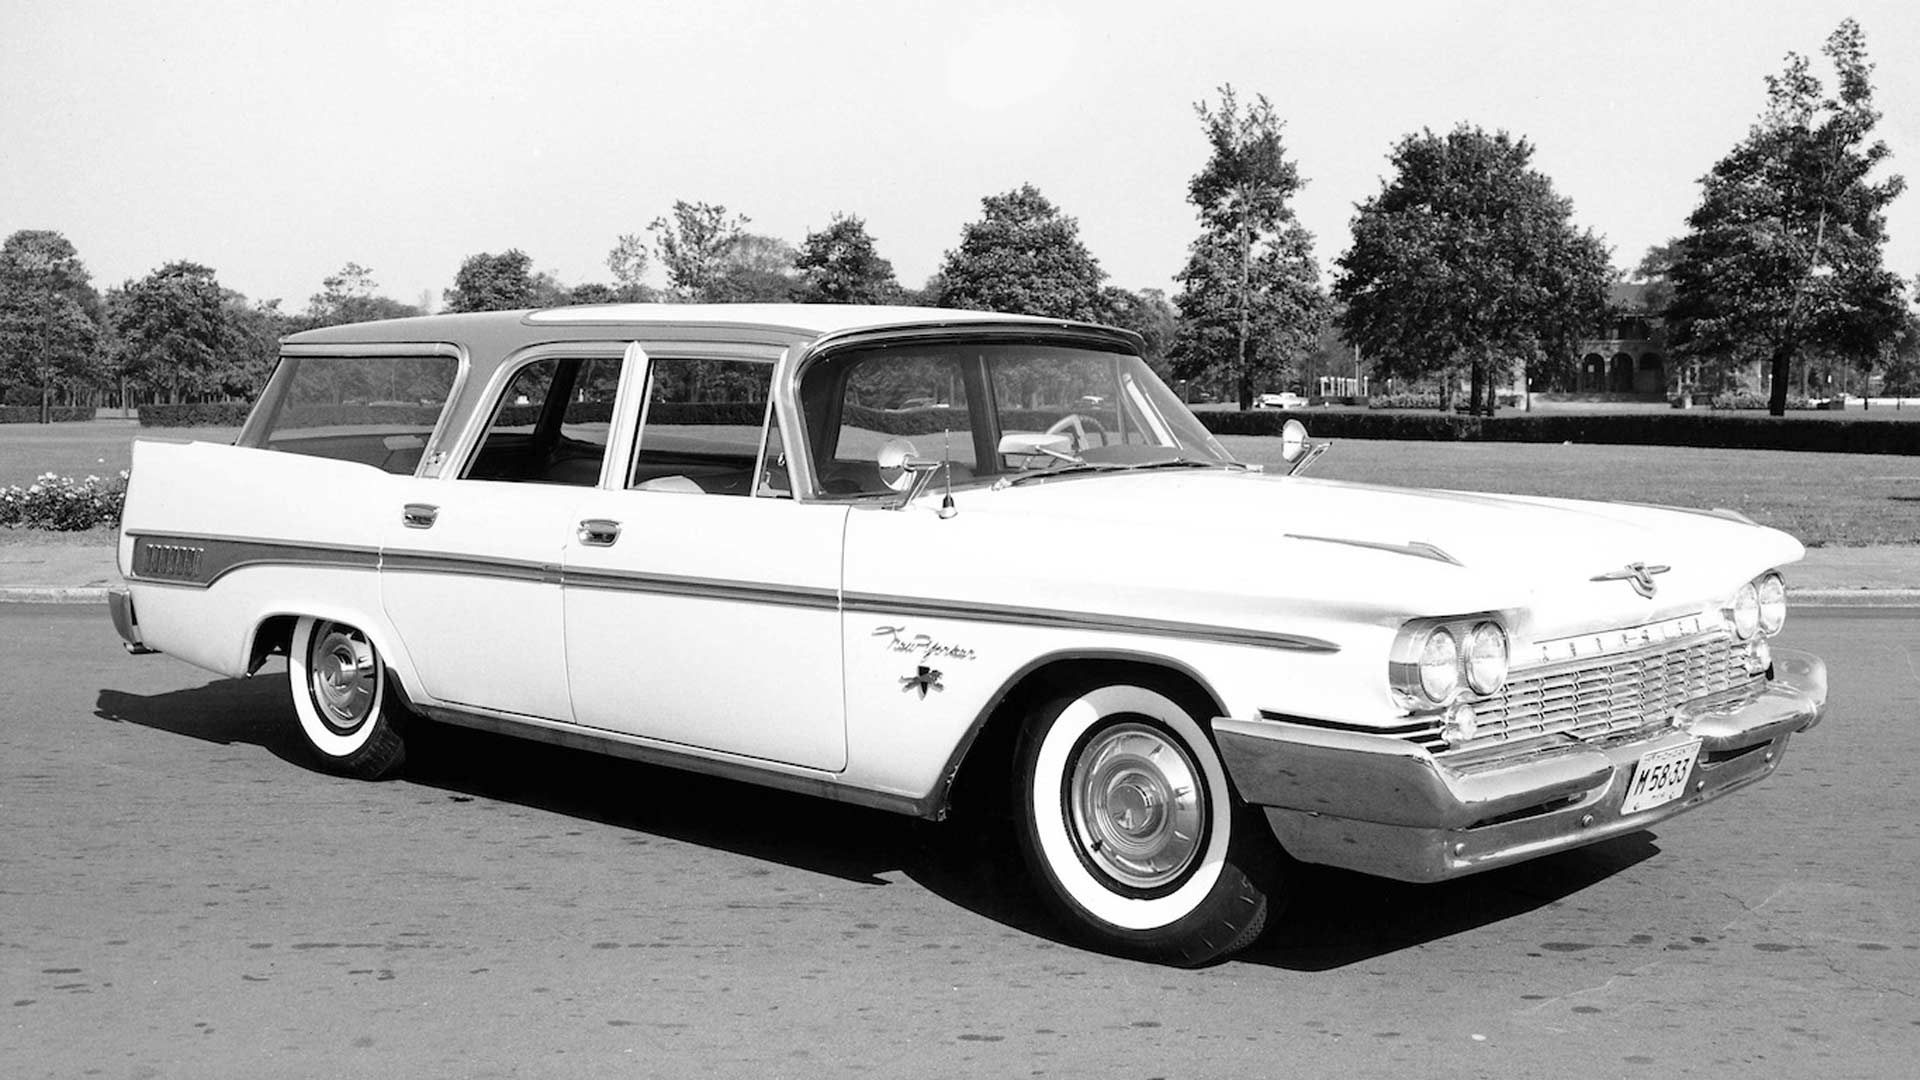 <p>It might be from an earlier decade than the others on our list, and it also happens to be a wagon. But the ’59 Town & Country is still very much a land yacht. Standard fit was the ‘Golden Lion’ 6.77-liter (413-cubic inch) V8 engine, with 350hp and a push-button three-speed automatic transmission.</p> <p>Optional extras included the ‘Mirrormatic’ electrically dimming rear-view mirror. Strange to think you can still pay extra for an automatic dimming mirror on a new car six decades later.</p>